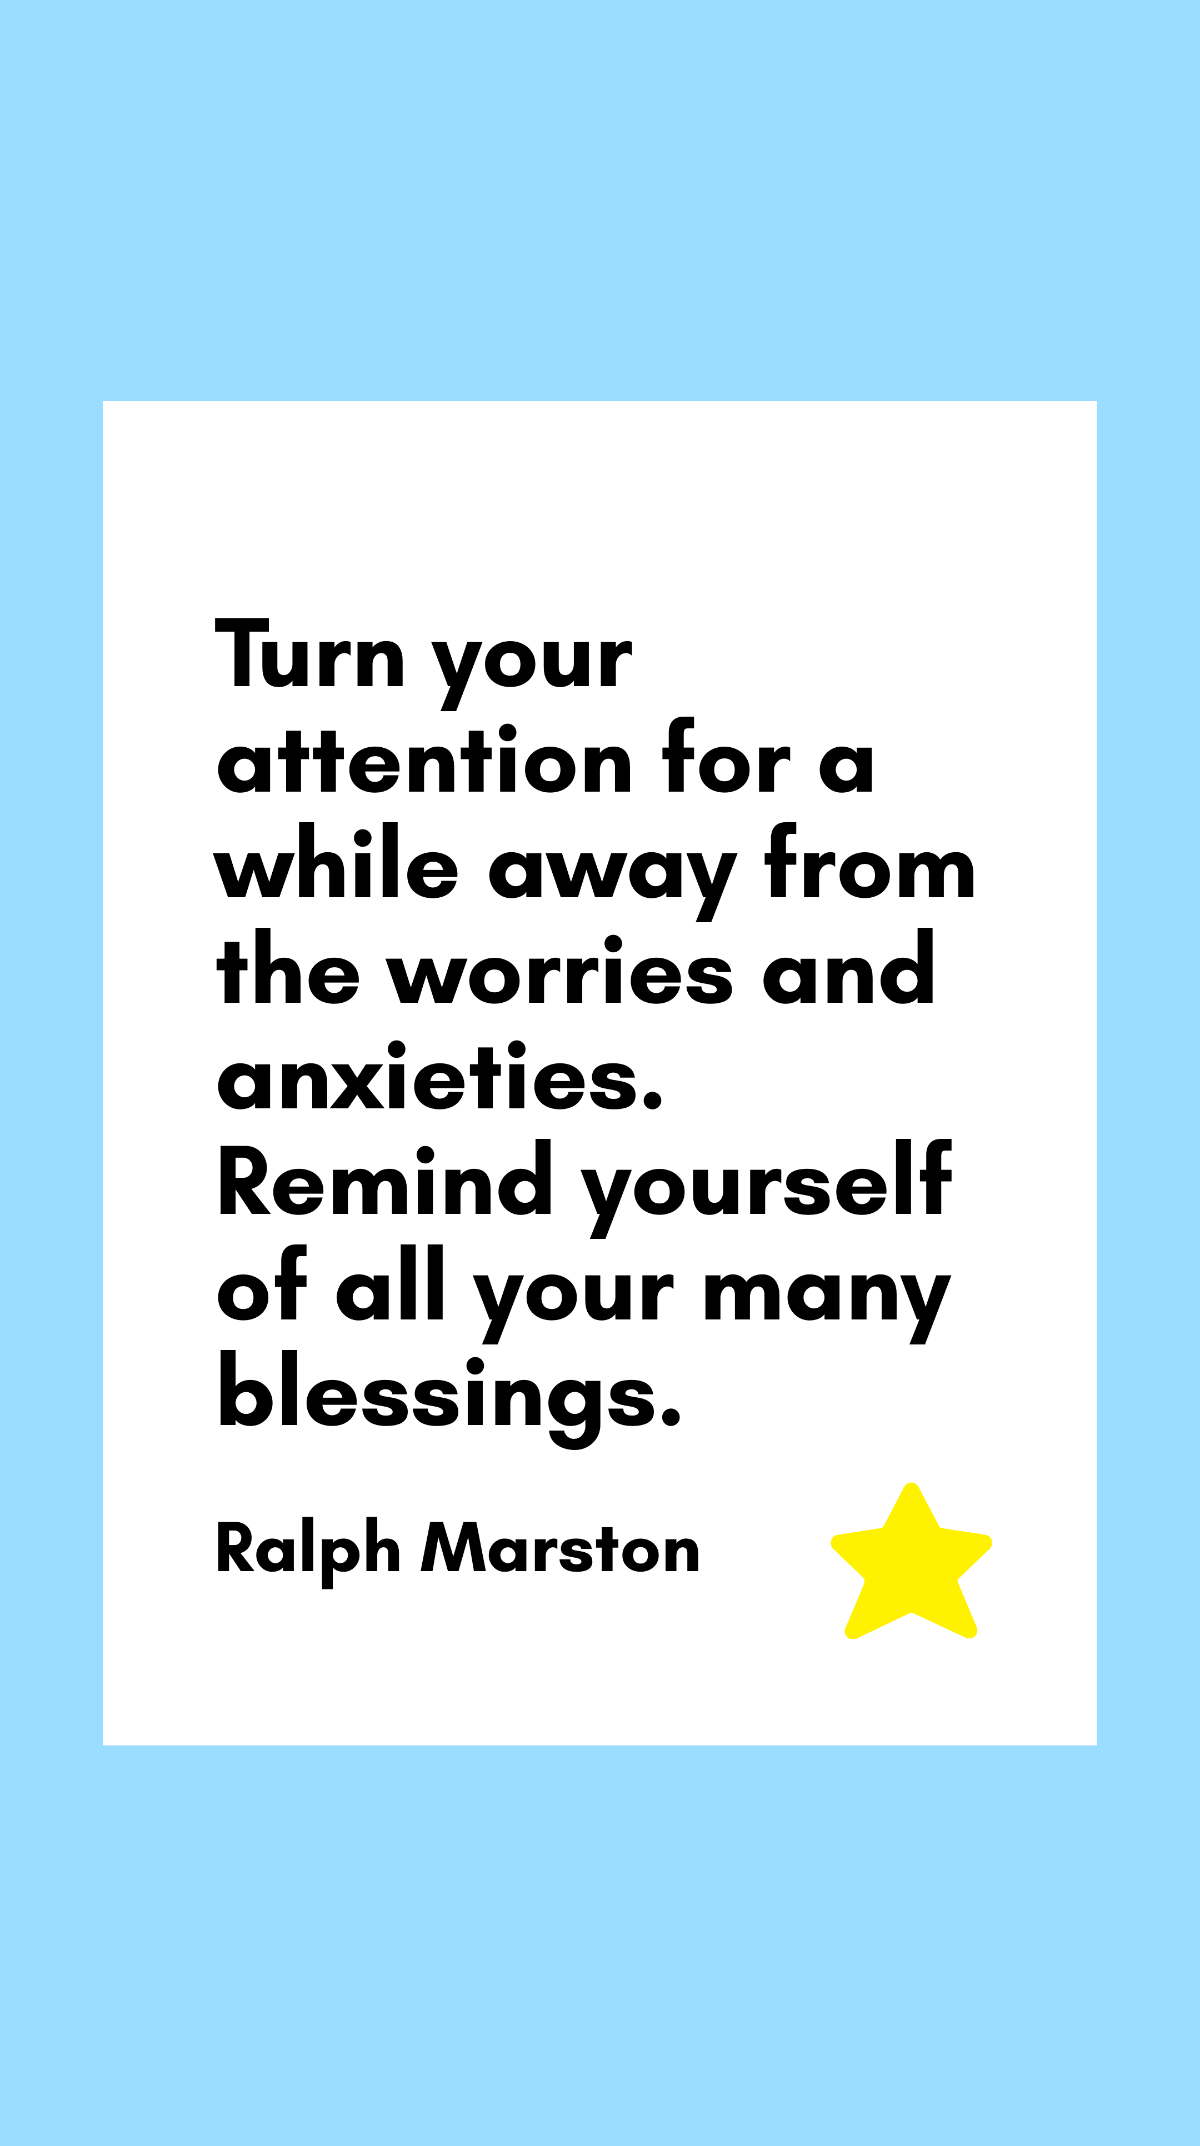 Ralph Marston - Turn your attention for a while away from the worries and anxieties. Remind yourself of all your many blessings. Template